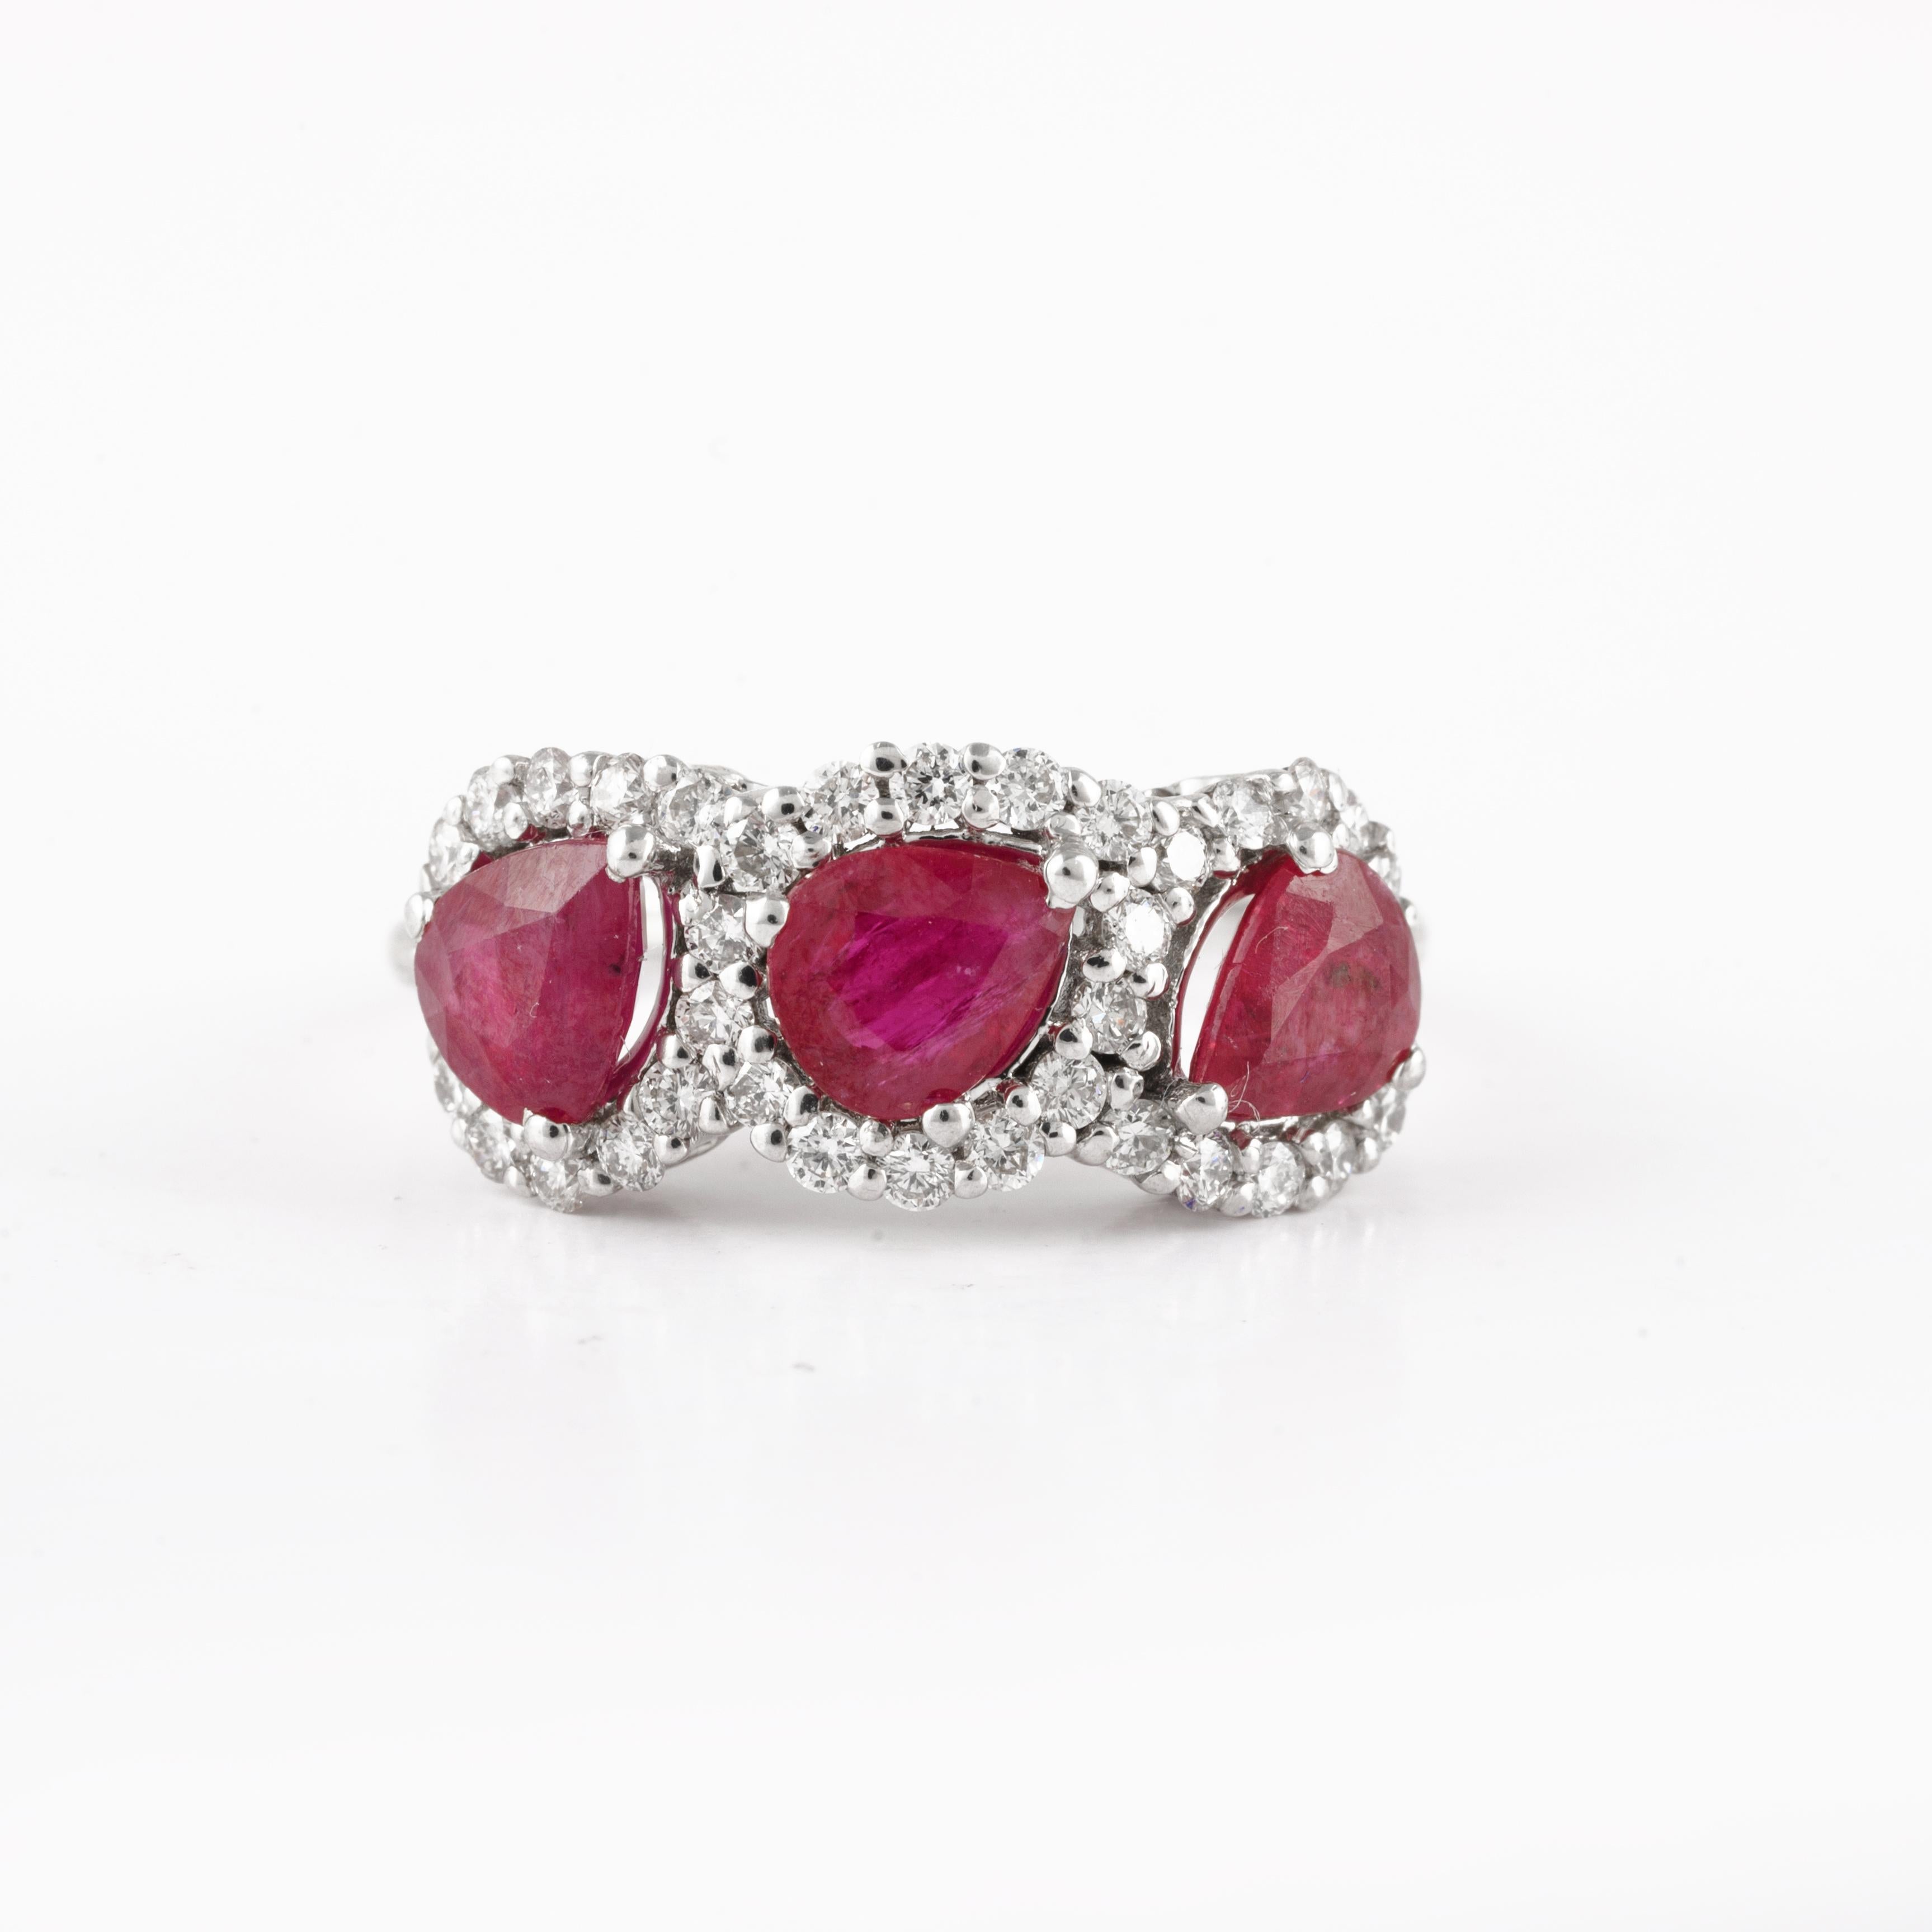 For Sale:  Three Stone Real Ruby Engagement Ring in 18k Solid White Gold with Diamonds 2